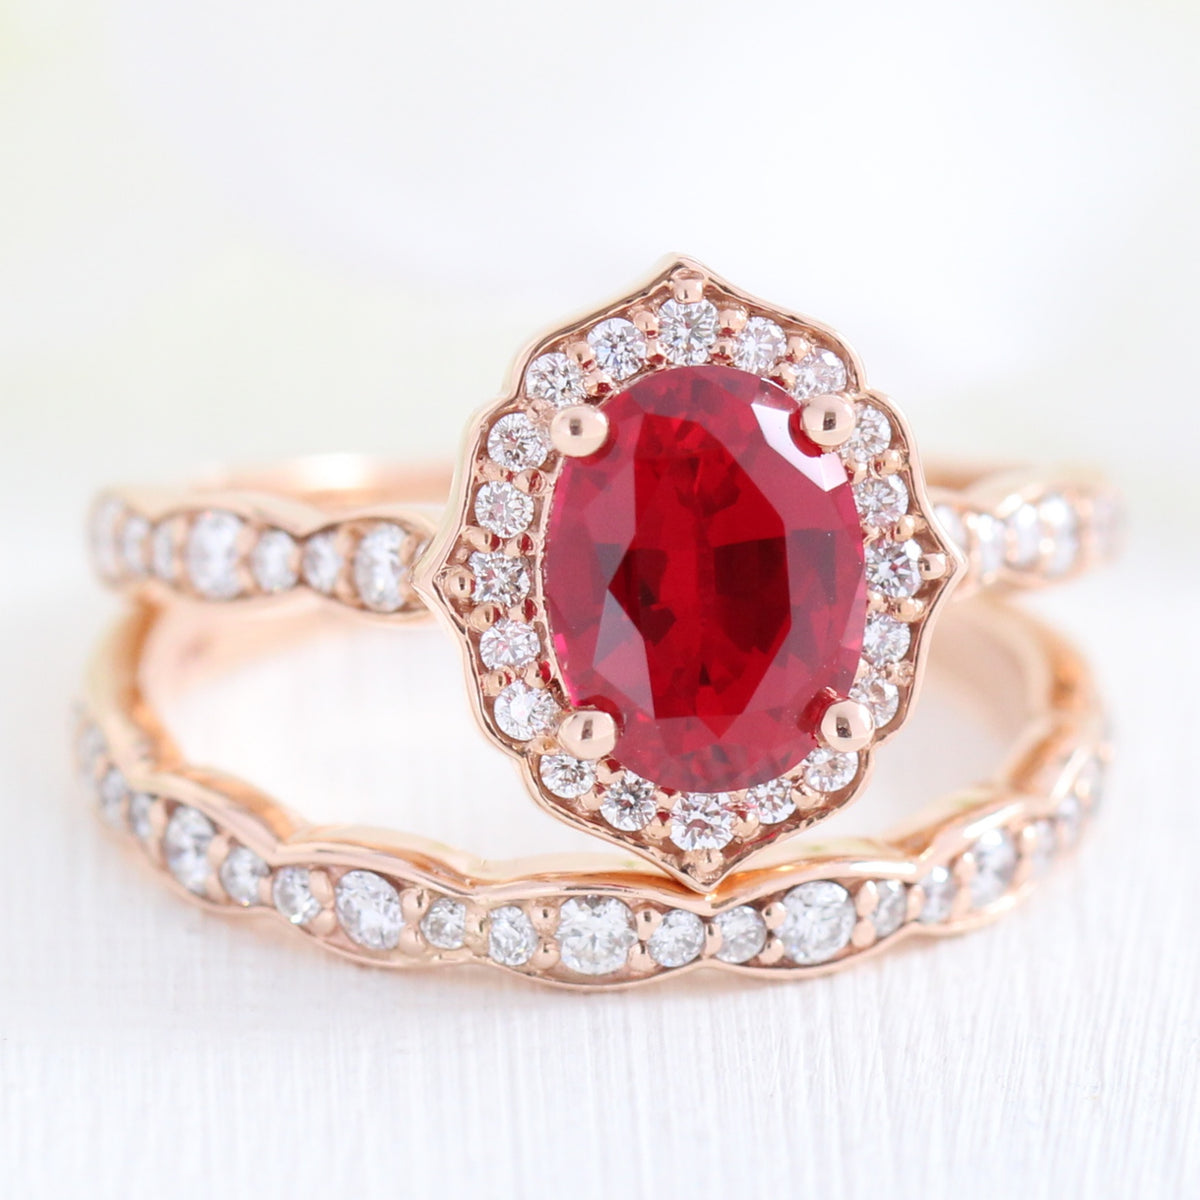 Vintage Style Engagement Rings, Antique Style Rings and Wedding Sets ...